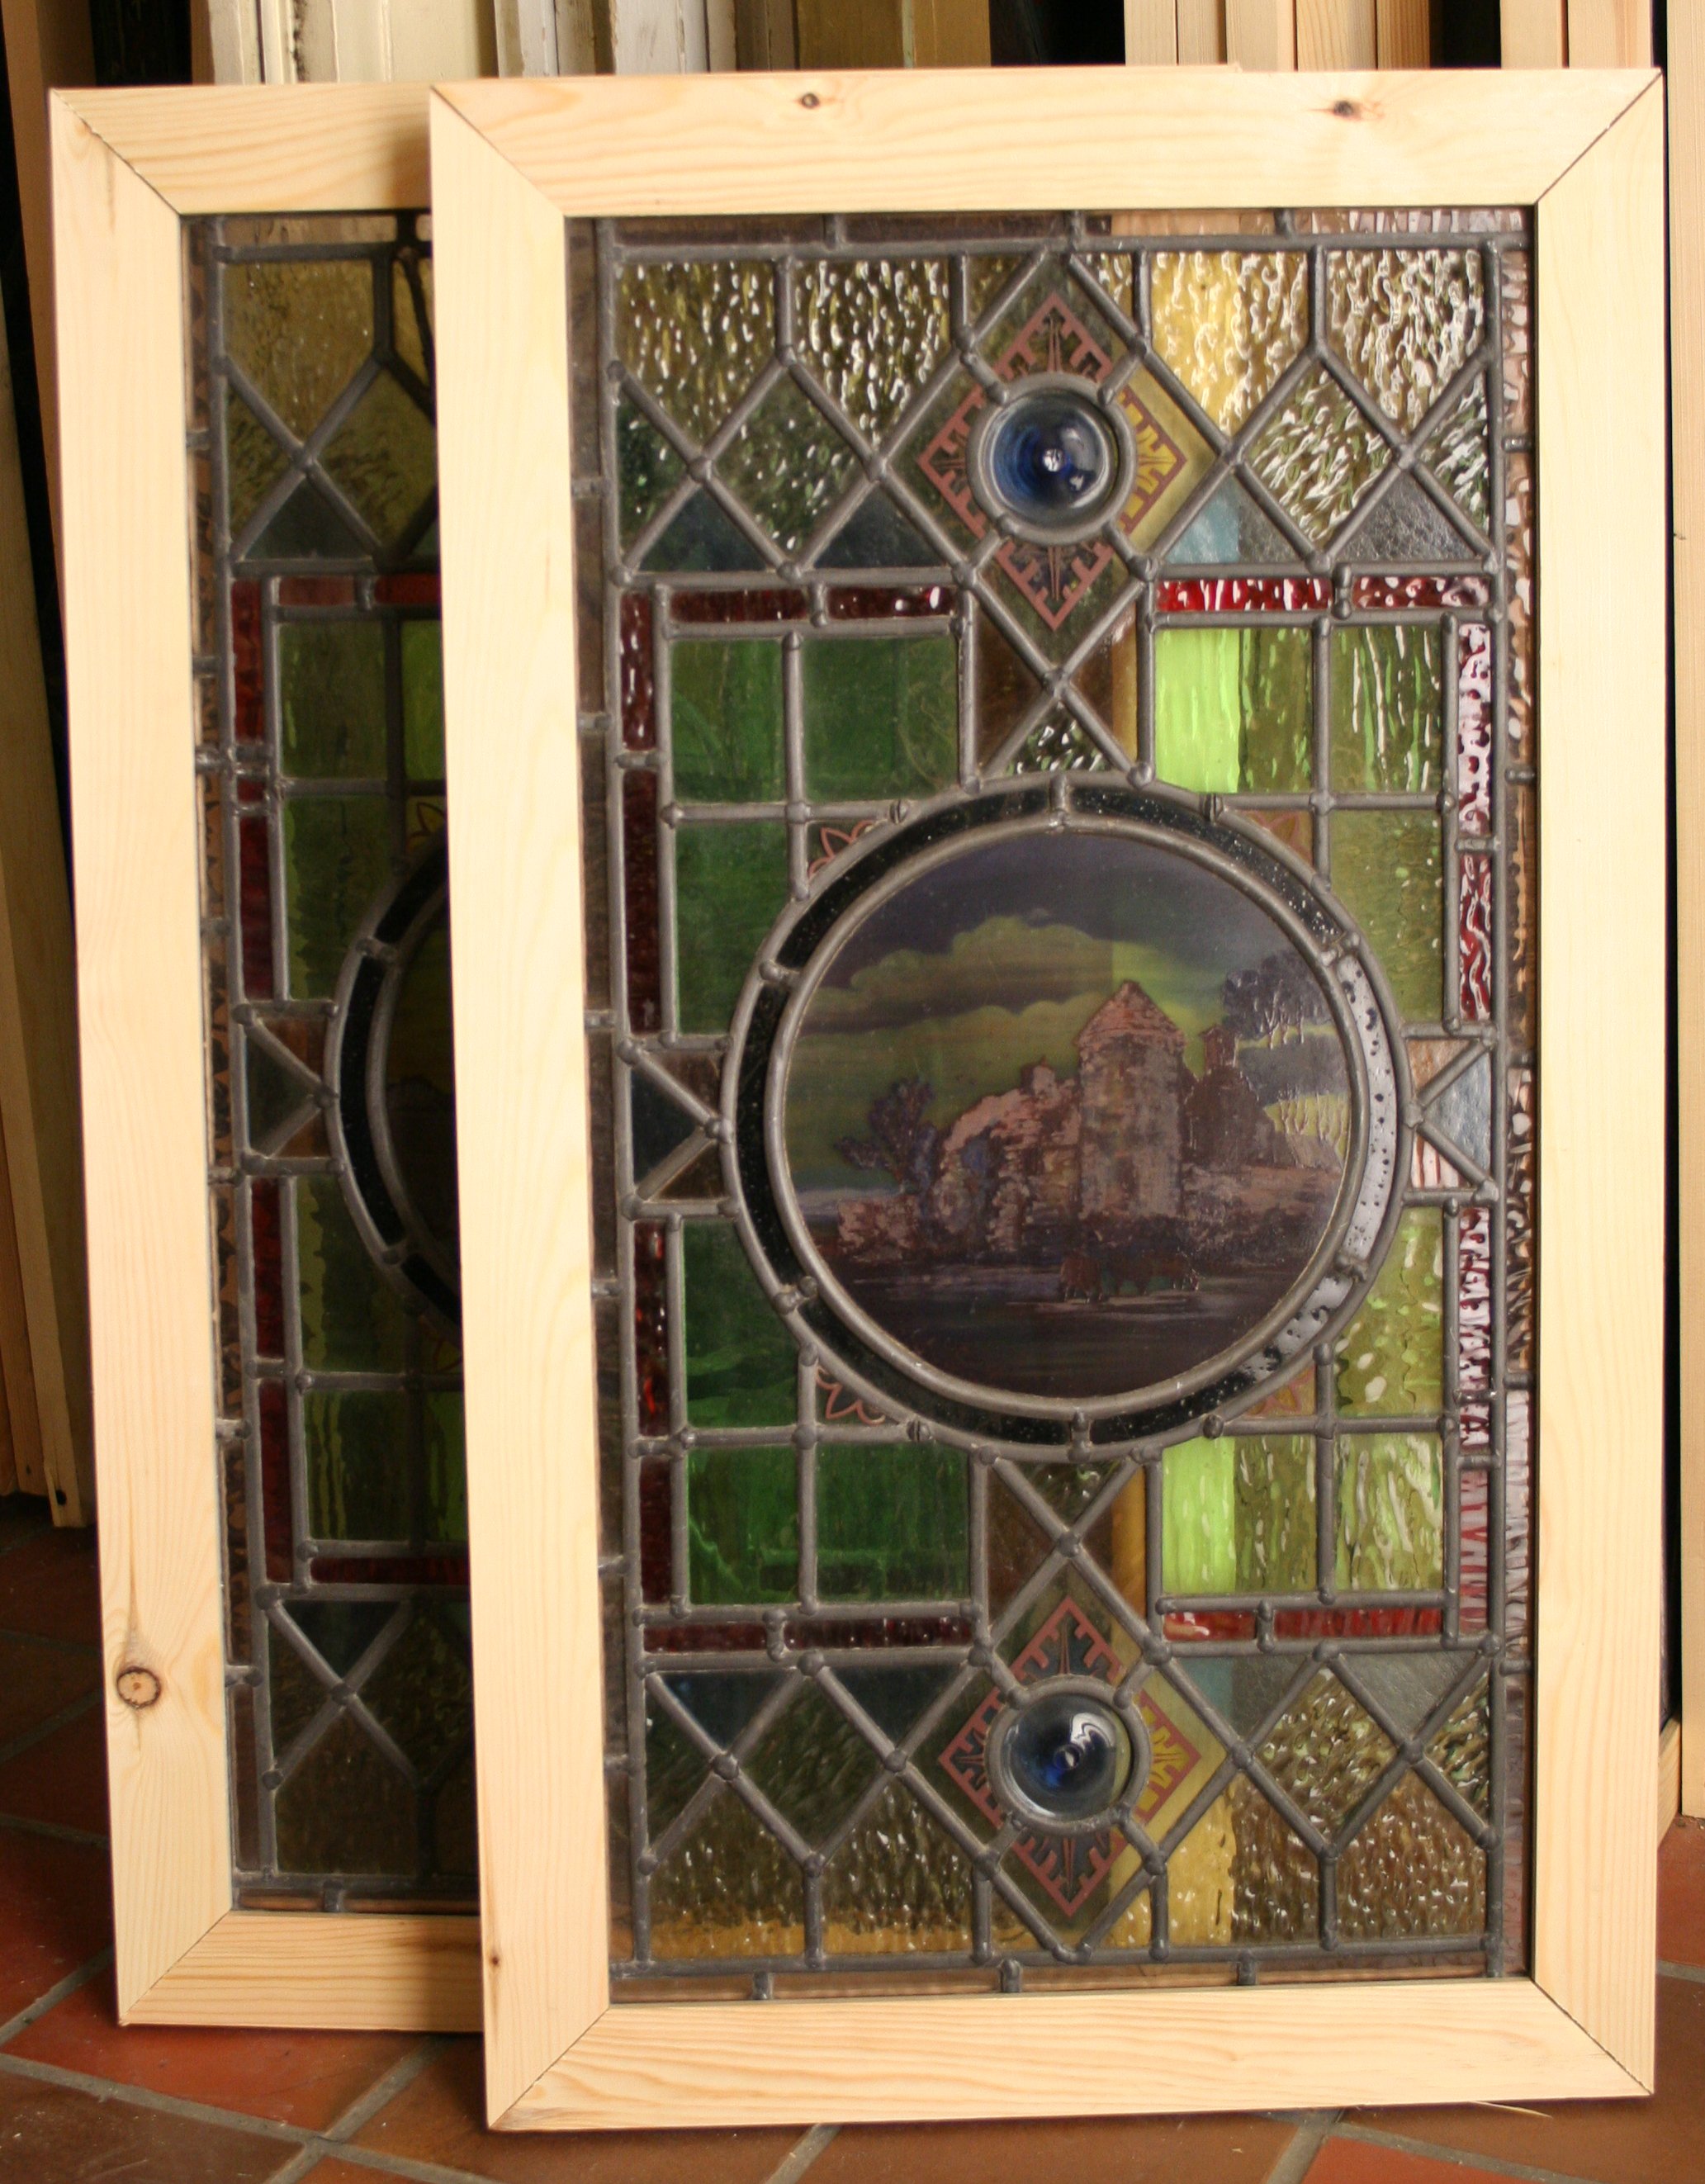 Ref Ed276 2 Edwardian Stained Glass Windows Edwardian Country Scenes Set A Tomkinson